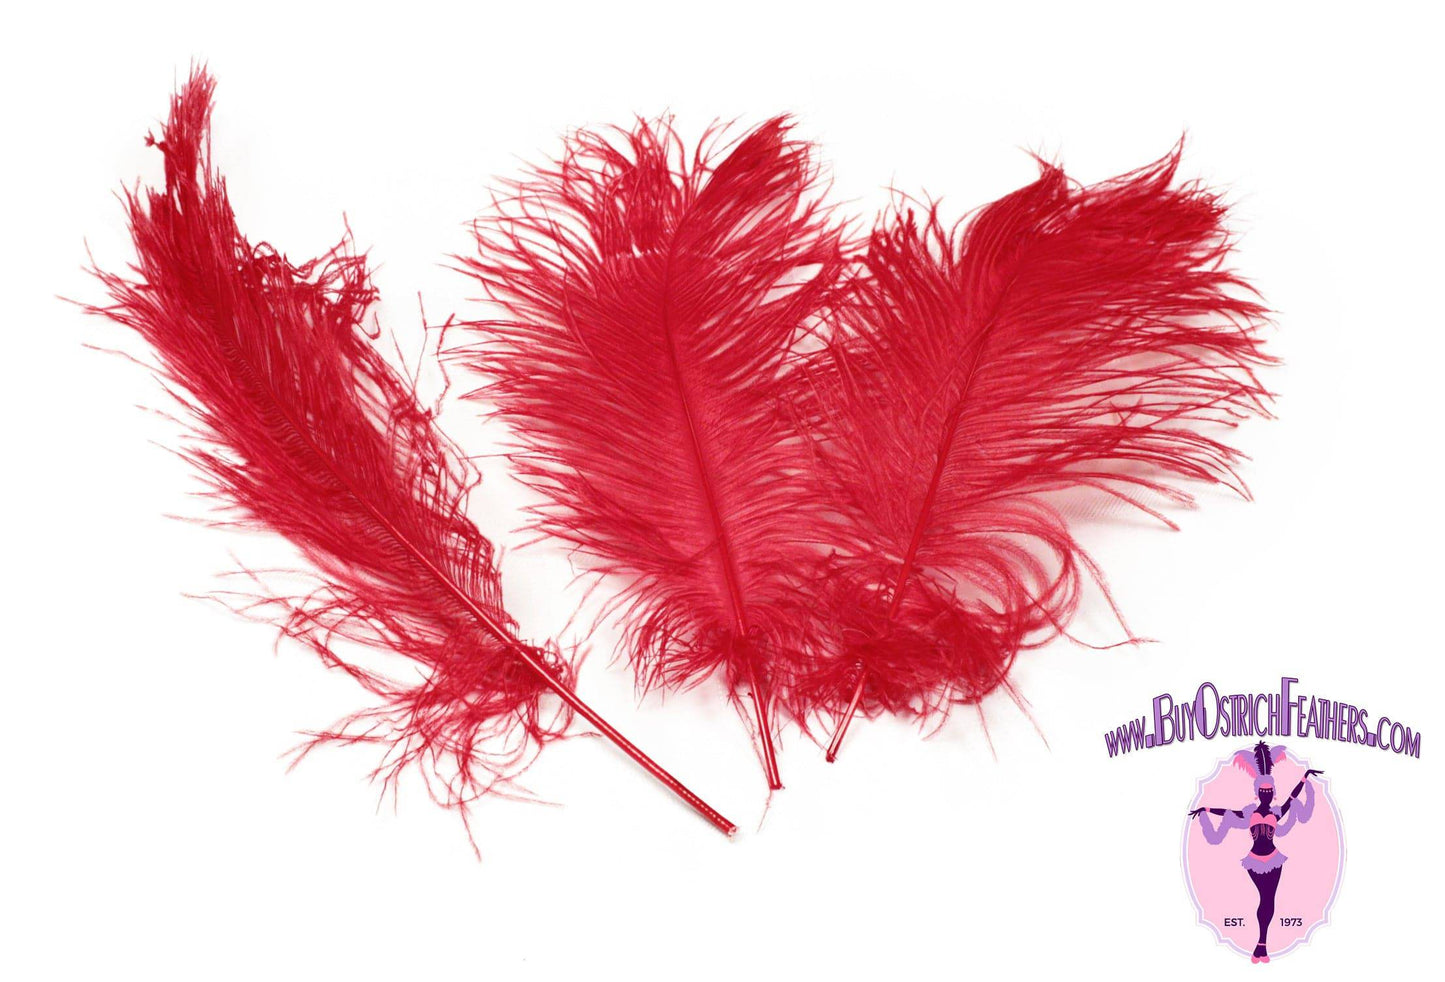 
                  
                    Complete Feather Centerpiece With 20" Vase (Red) - Buy Ostrich Feathers
                  
                